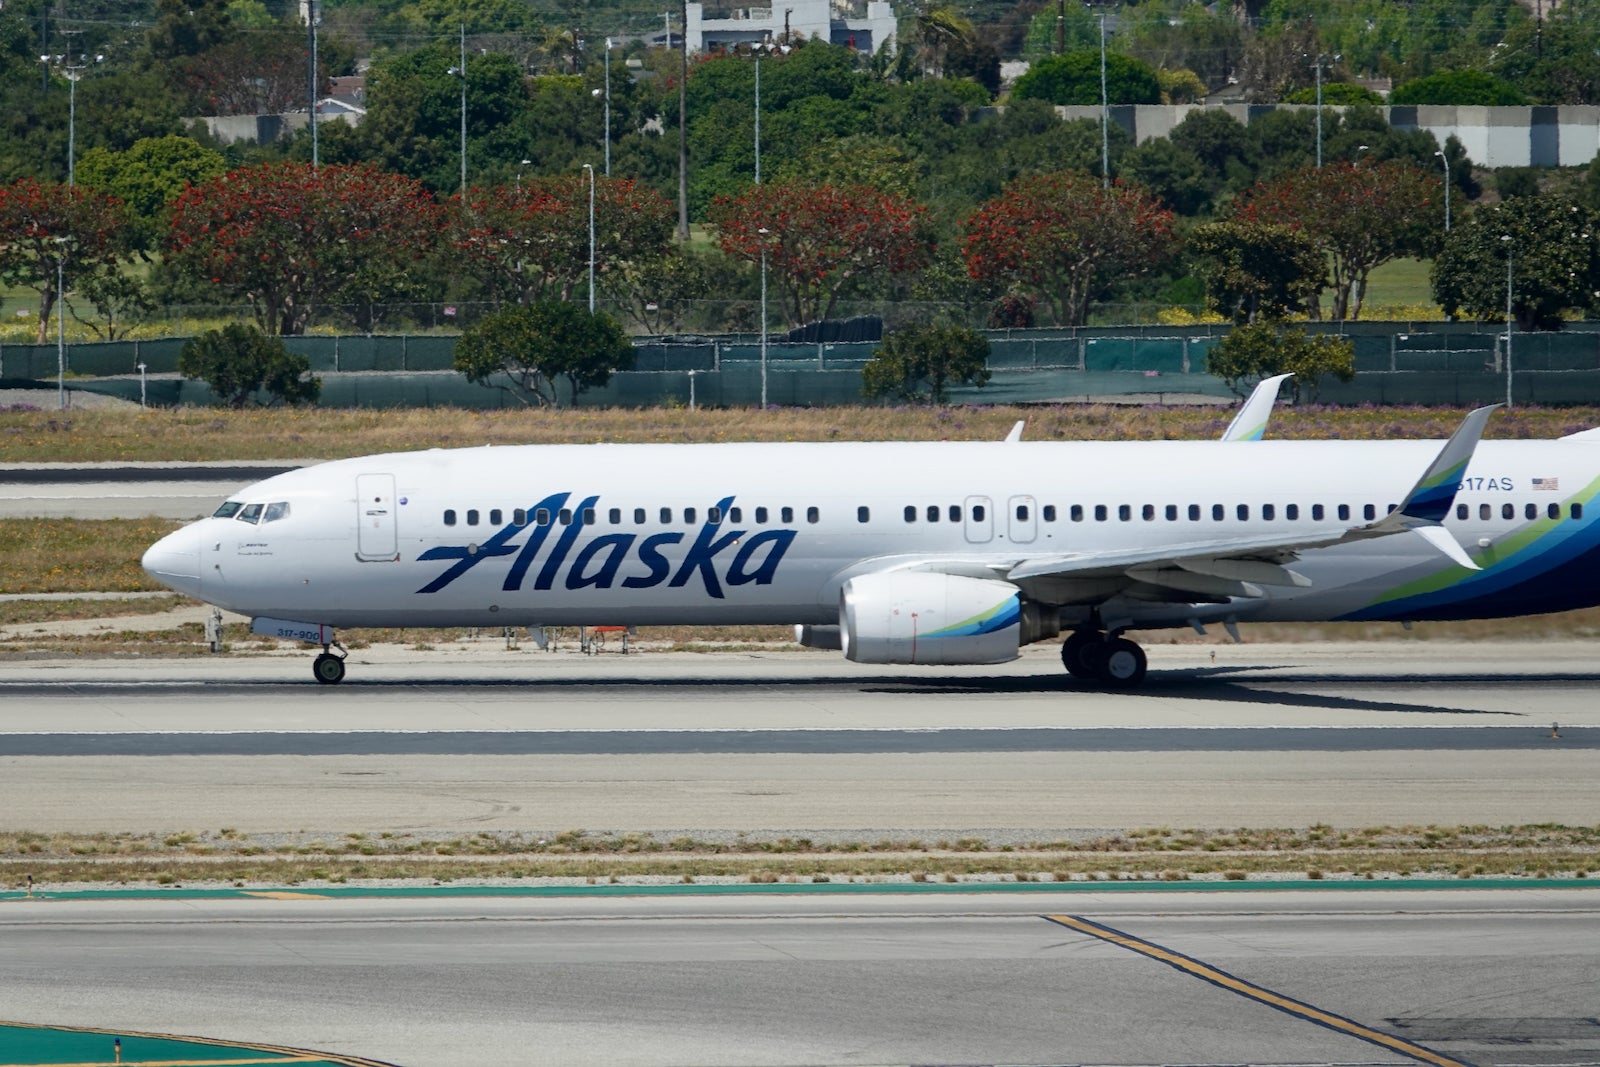 Chasing elite status on Alaska Airlines? A flight to California this fall could ..